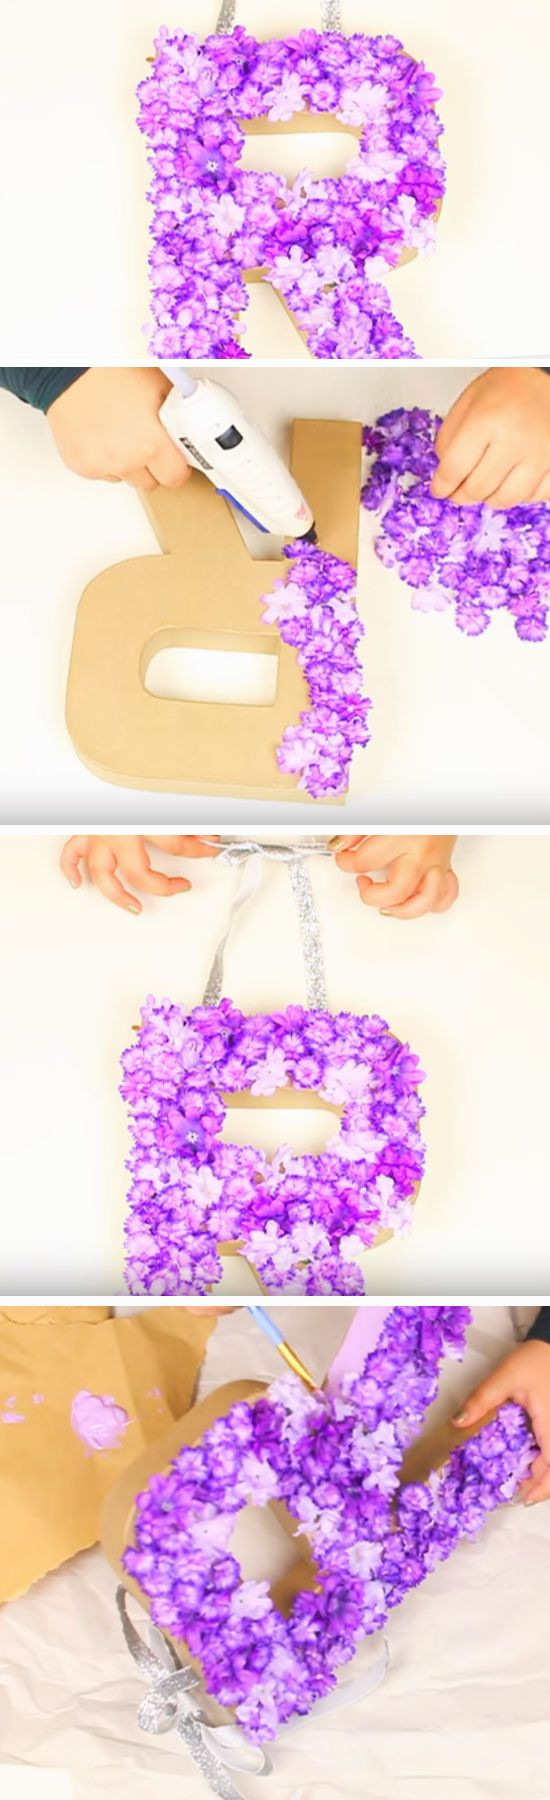 Craft Gift Ideas For Girls
 Best 25 Crafts for teens ideas on Pinterest